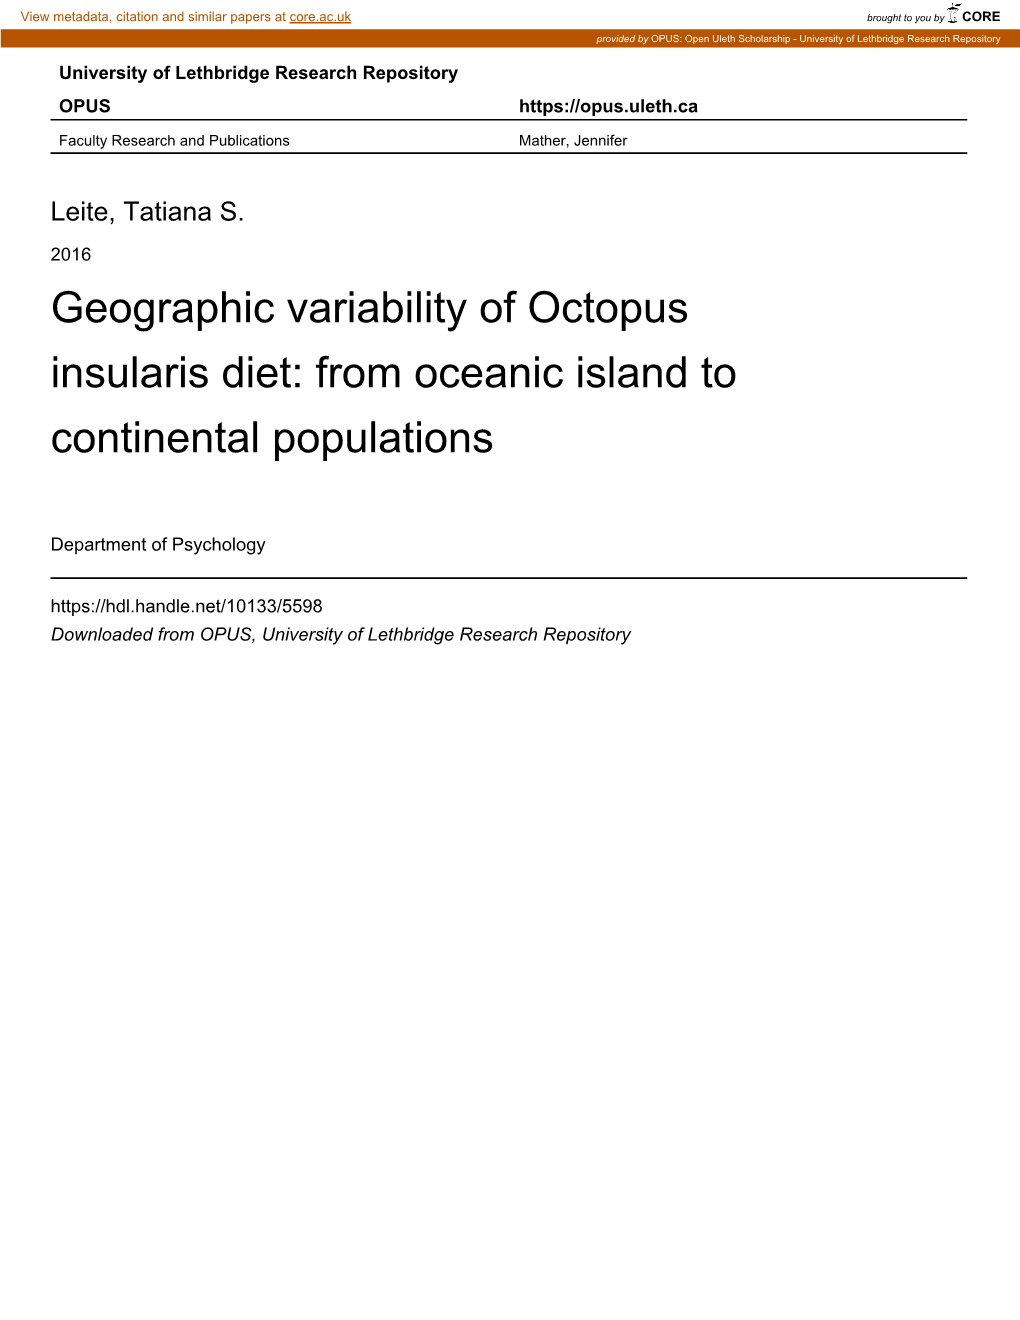 Geographic Variability of Octopus Insularis Diet: from Oceanic Island to Continental Populations